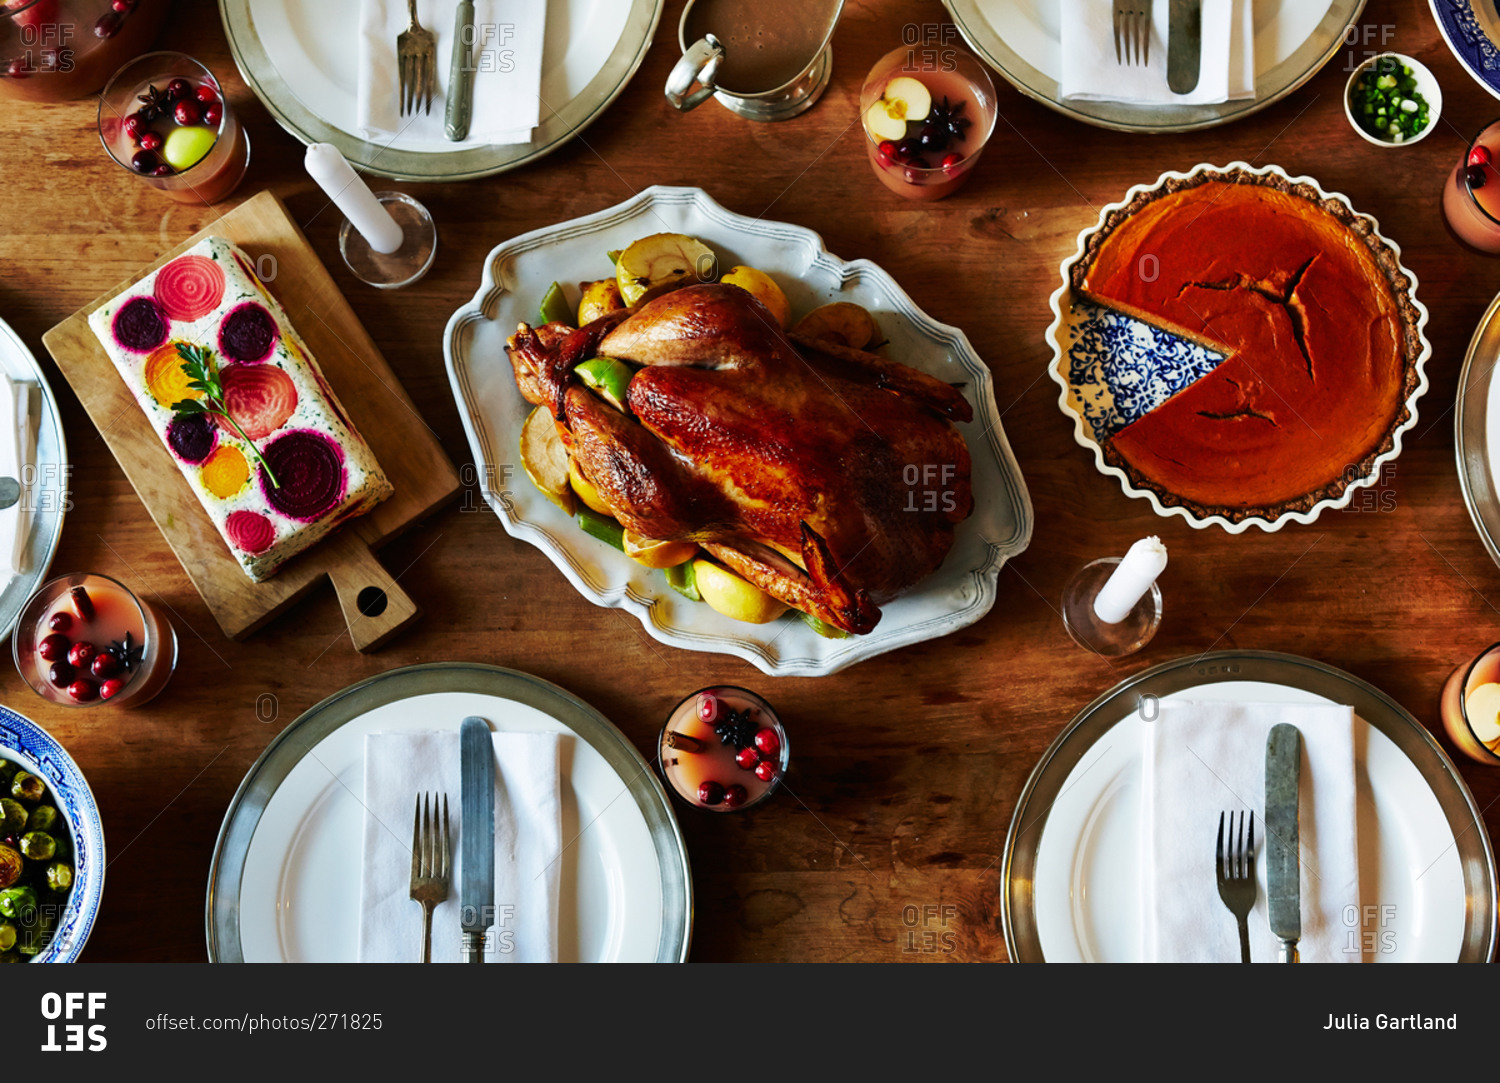 Overhead view of a Thanksgiving dinner table with roasted turkey